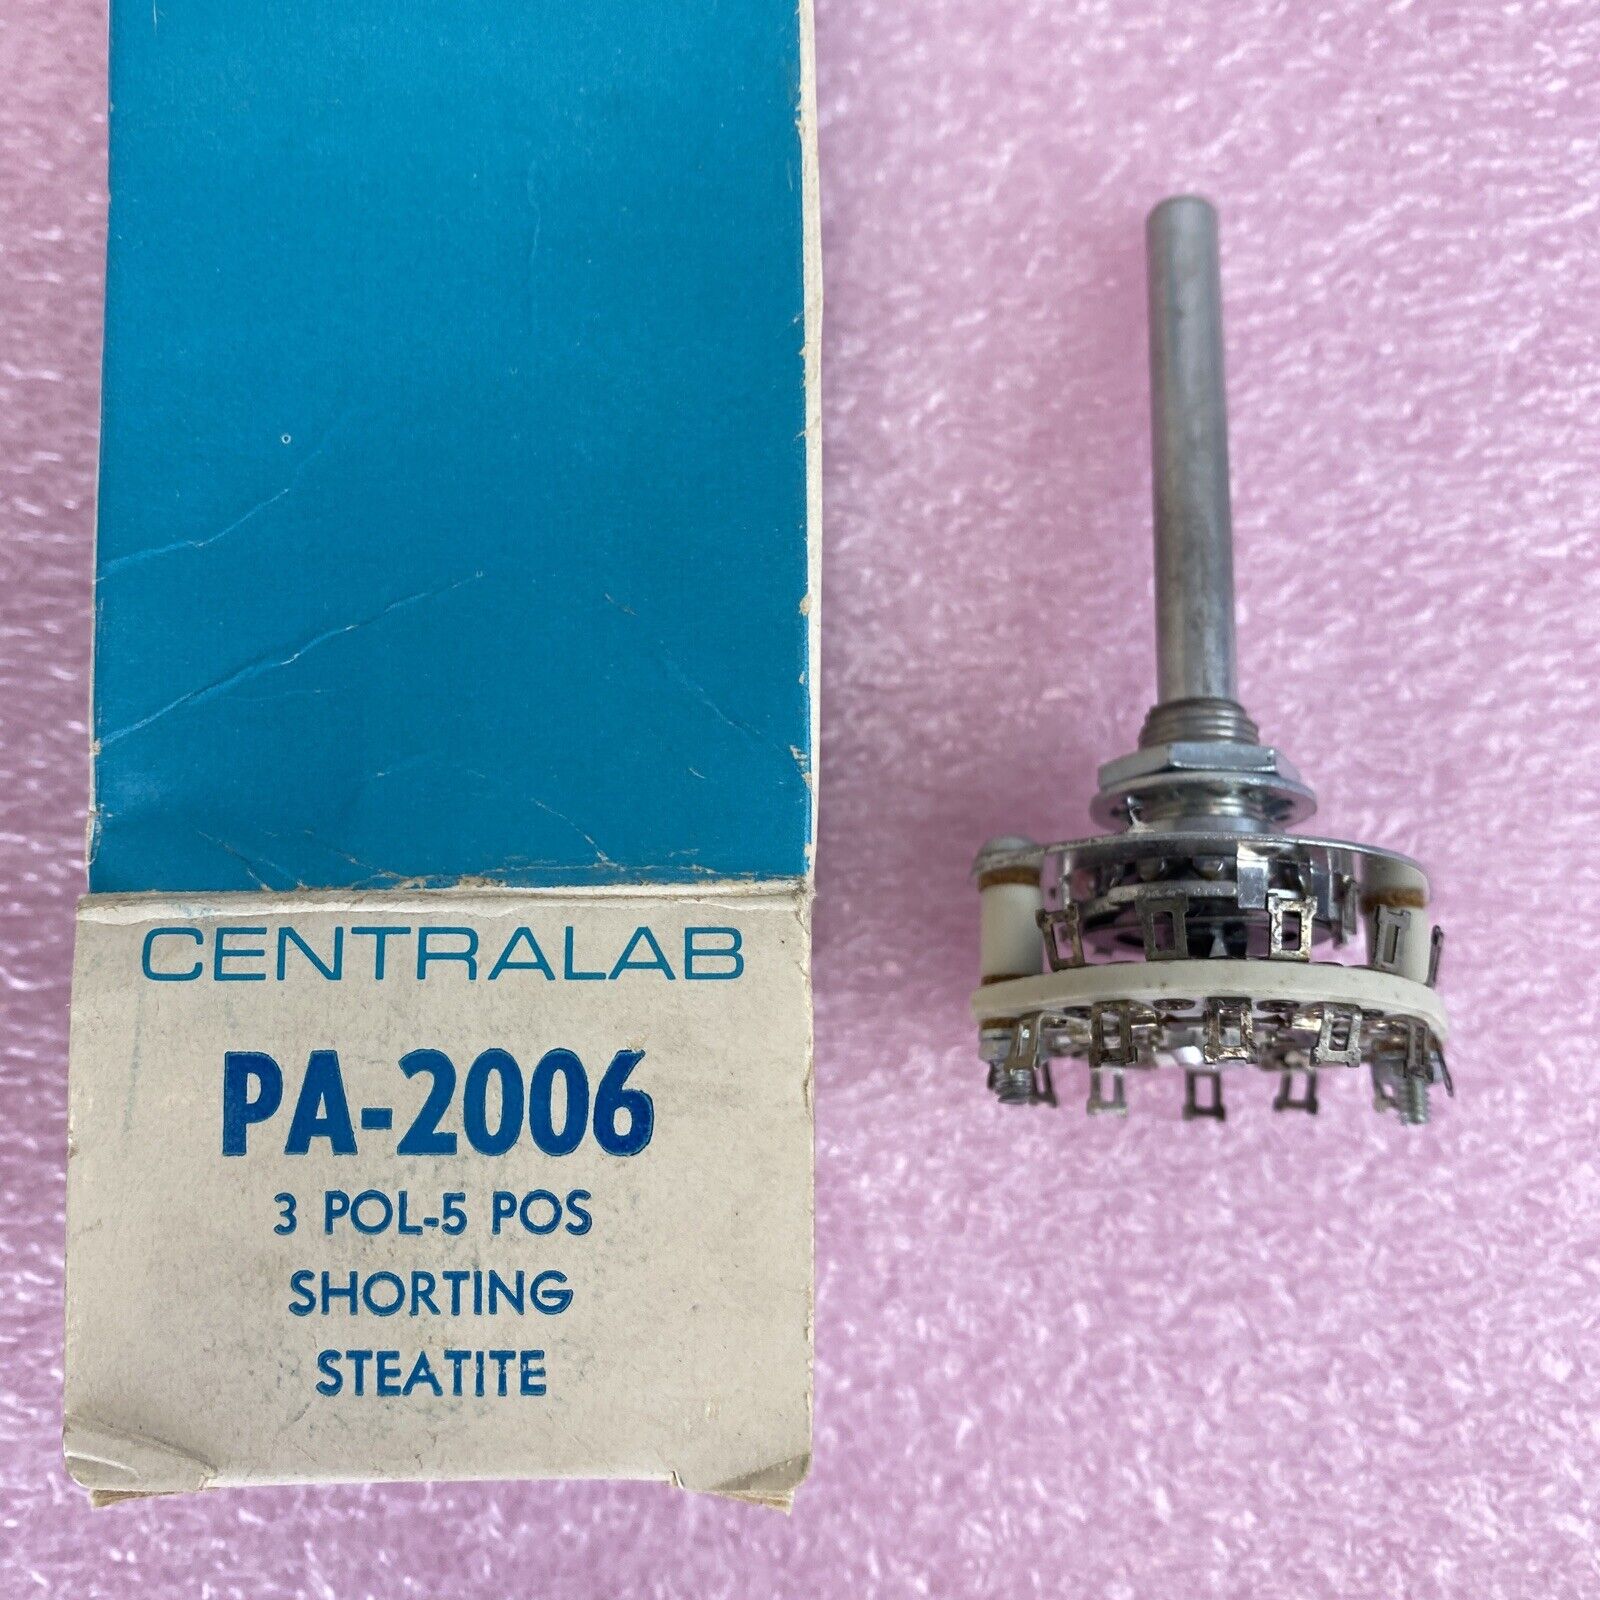 Centralab PA-2006 3 pol 5 pos non-shorting Steatite switch